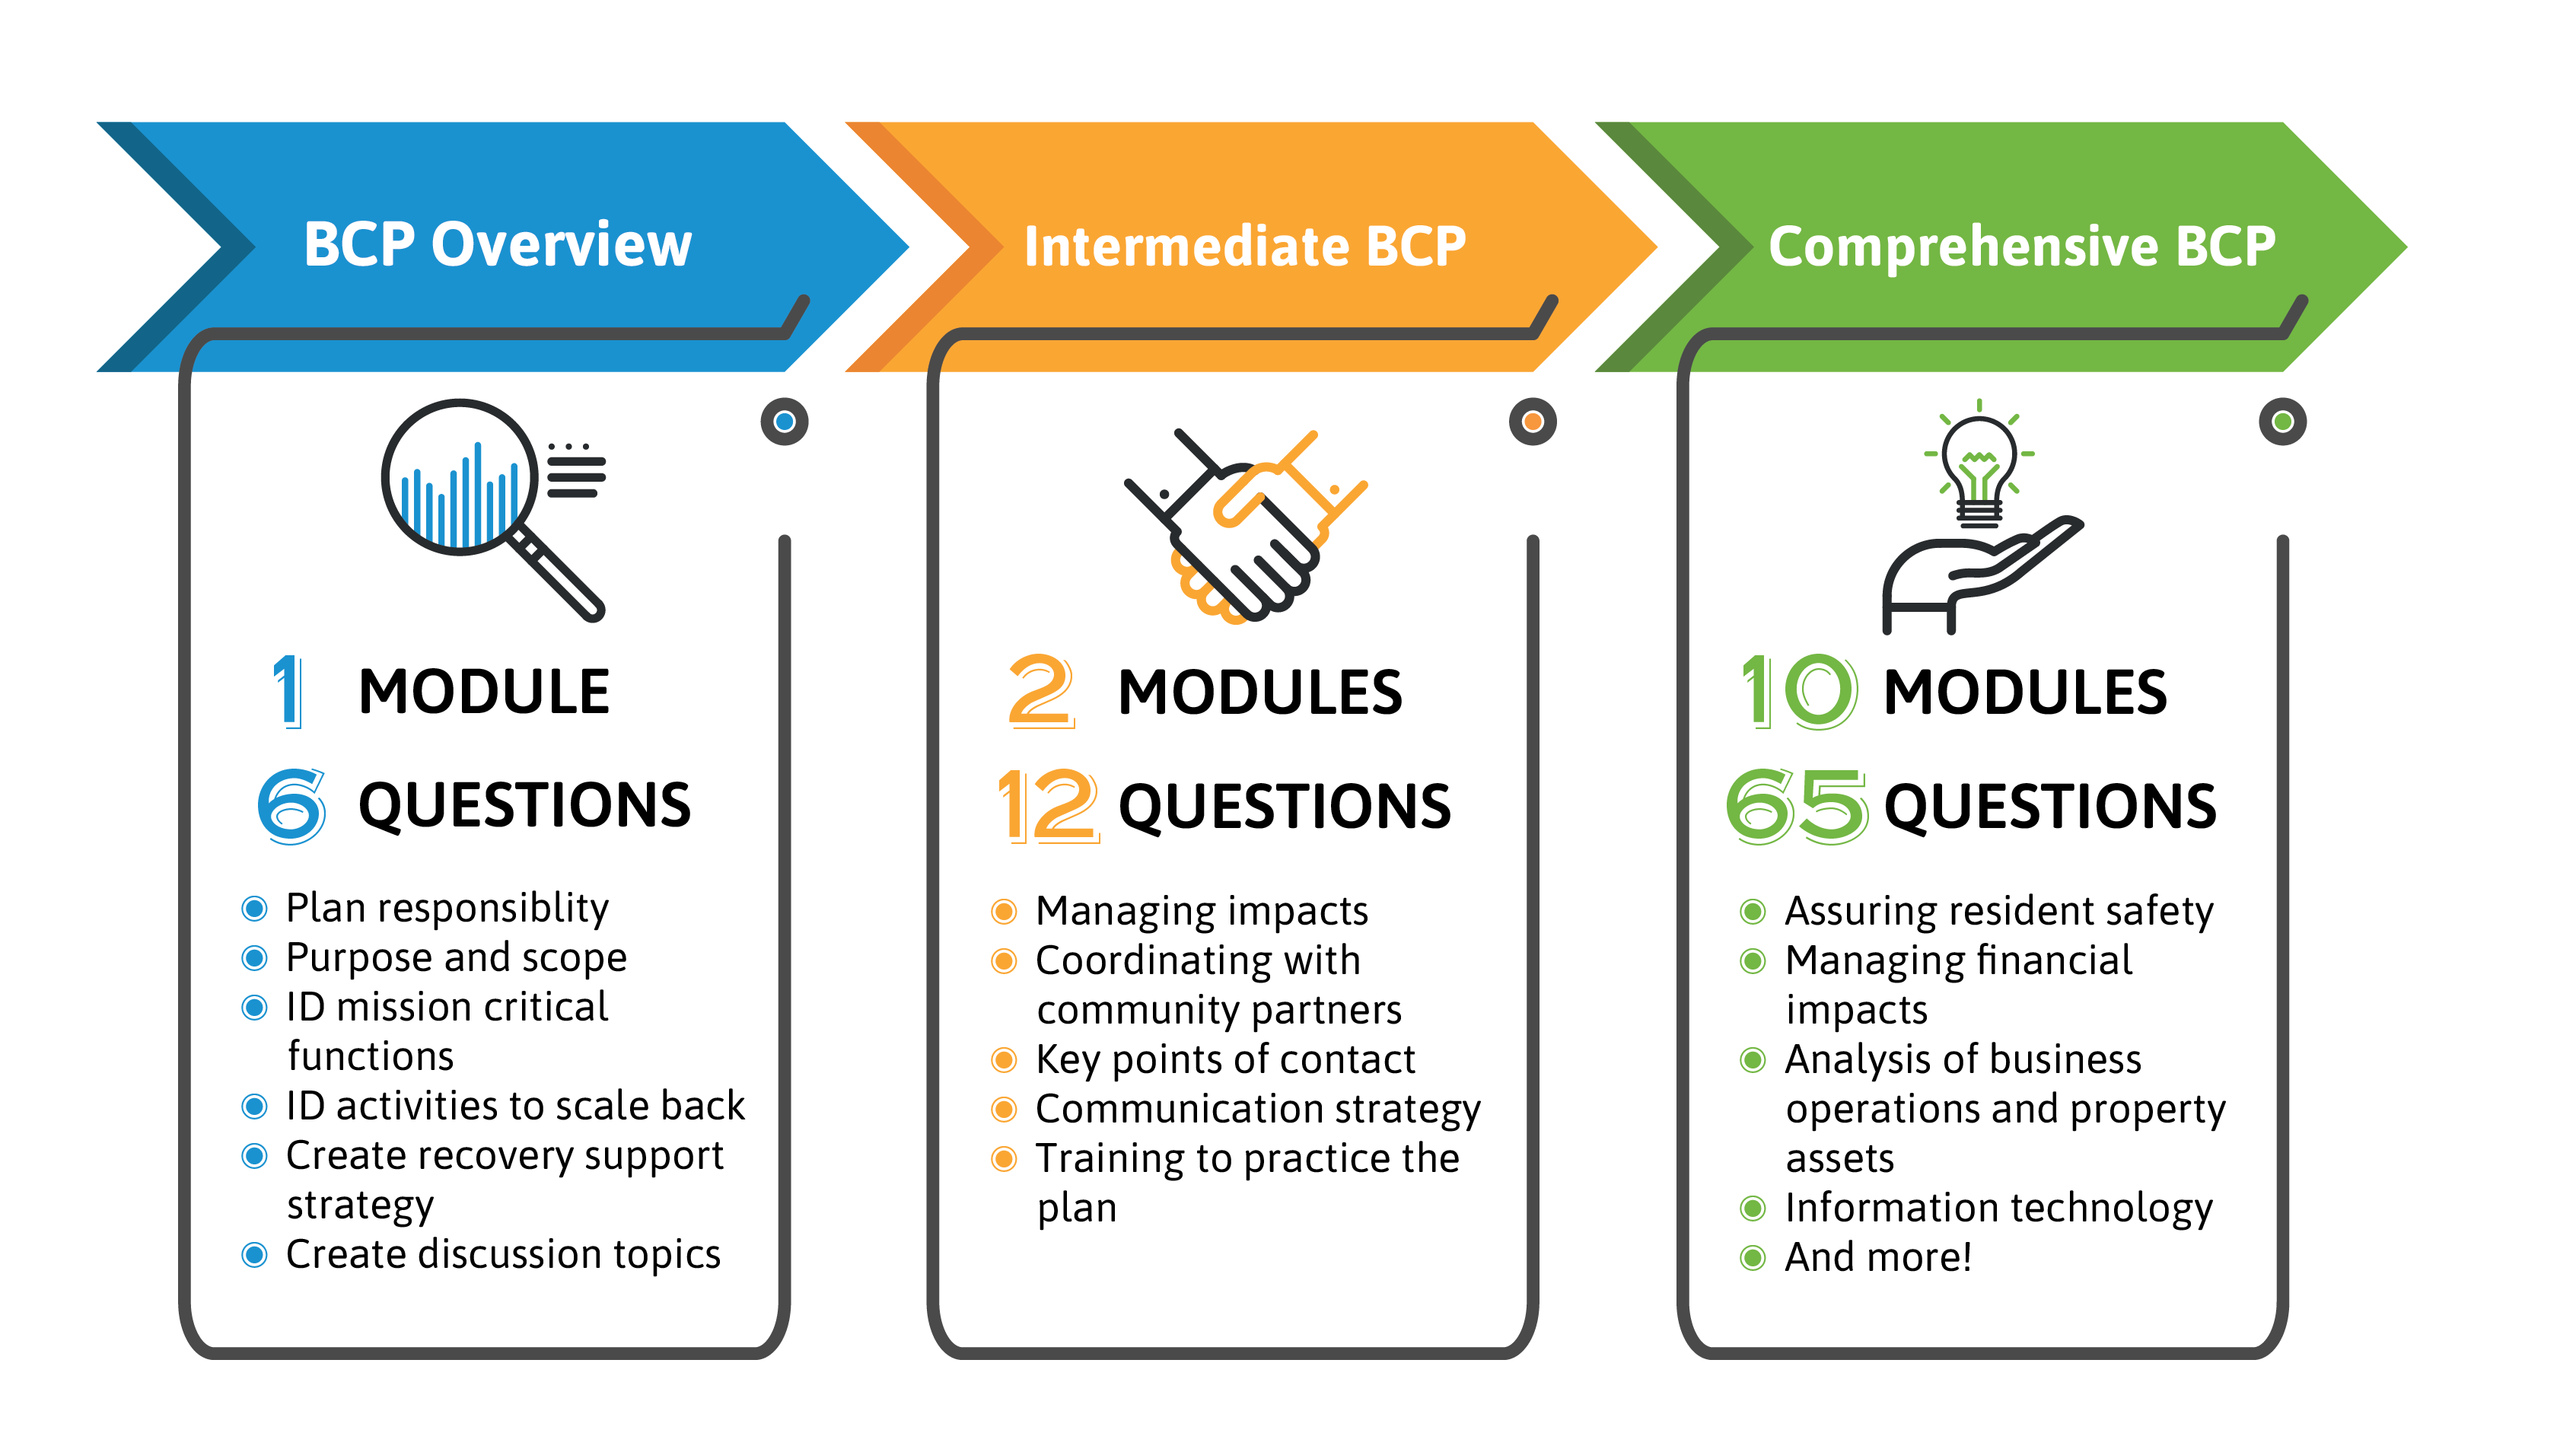 A three column image graphically describing the differences between the three options for business continuity plans available through this tool